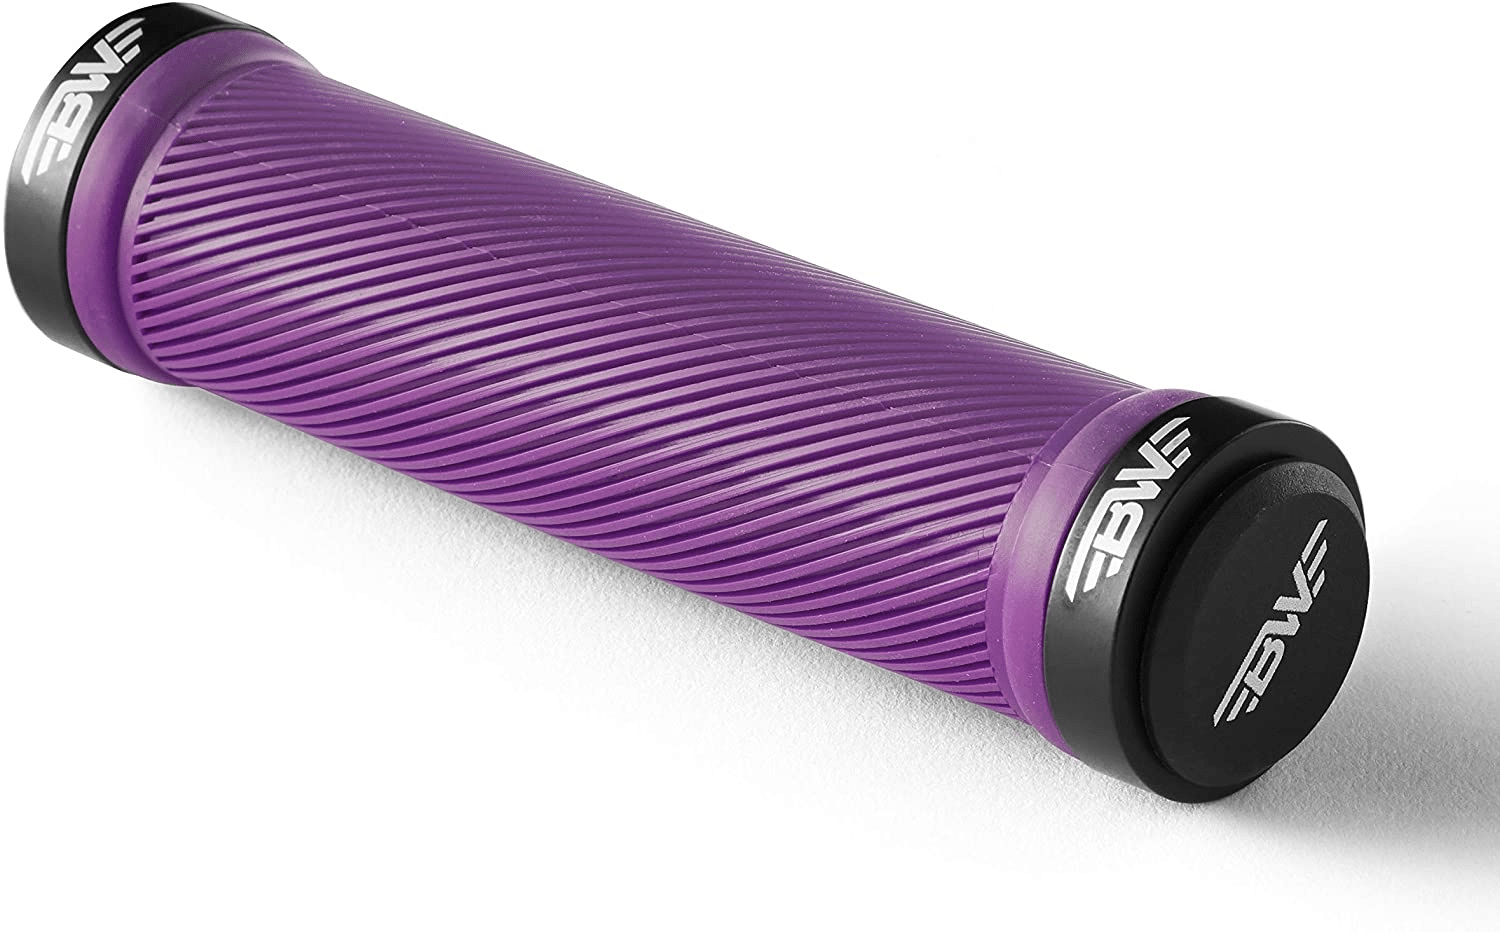 Ribbed mountain bike grips allow for movement of air between the grip and your palm providing better grip for sweaty hands.